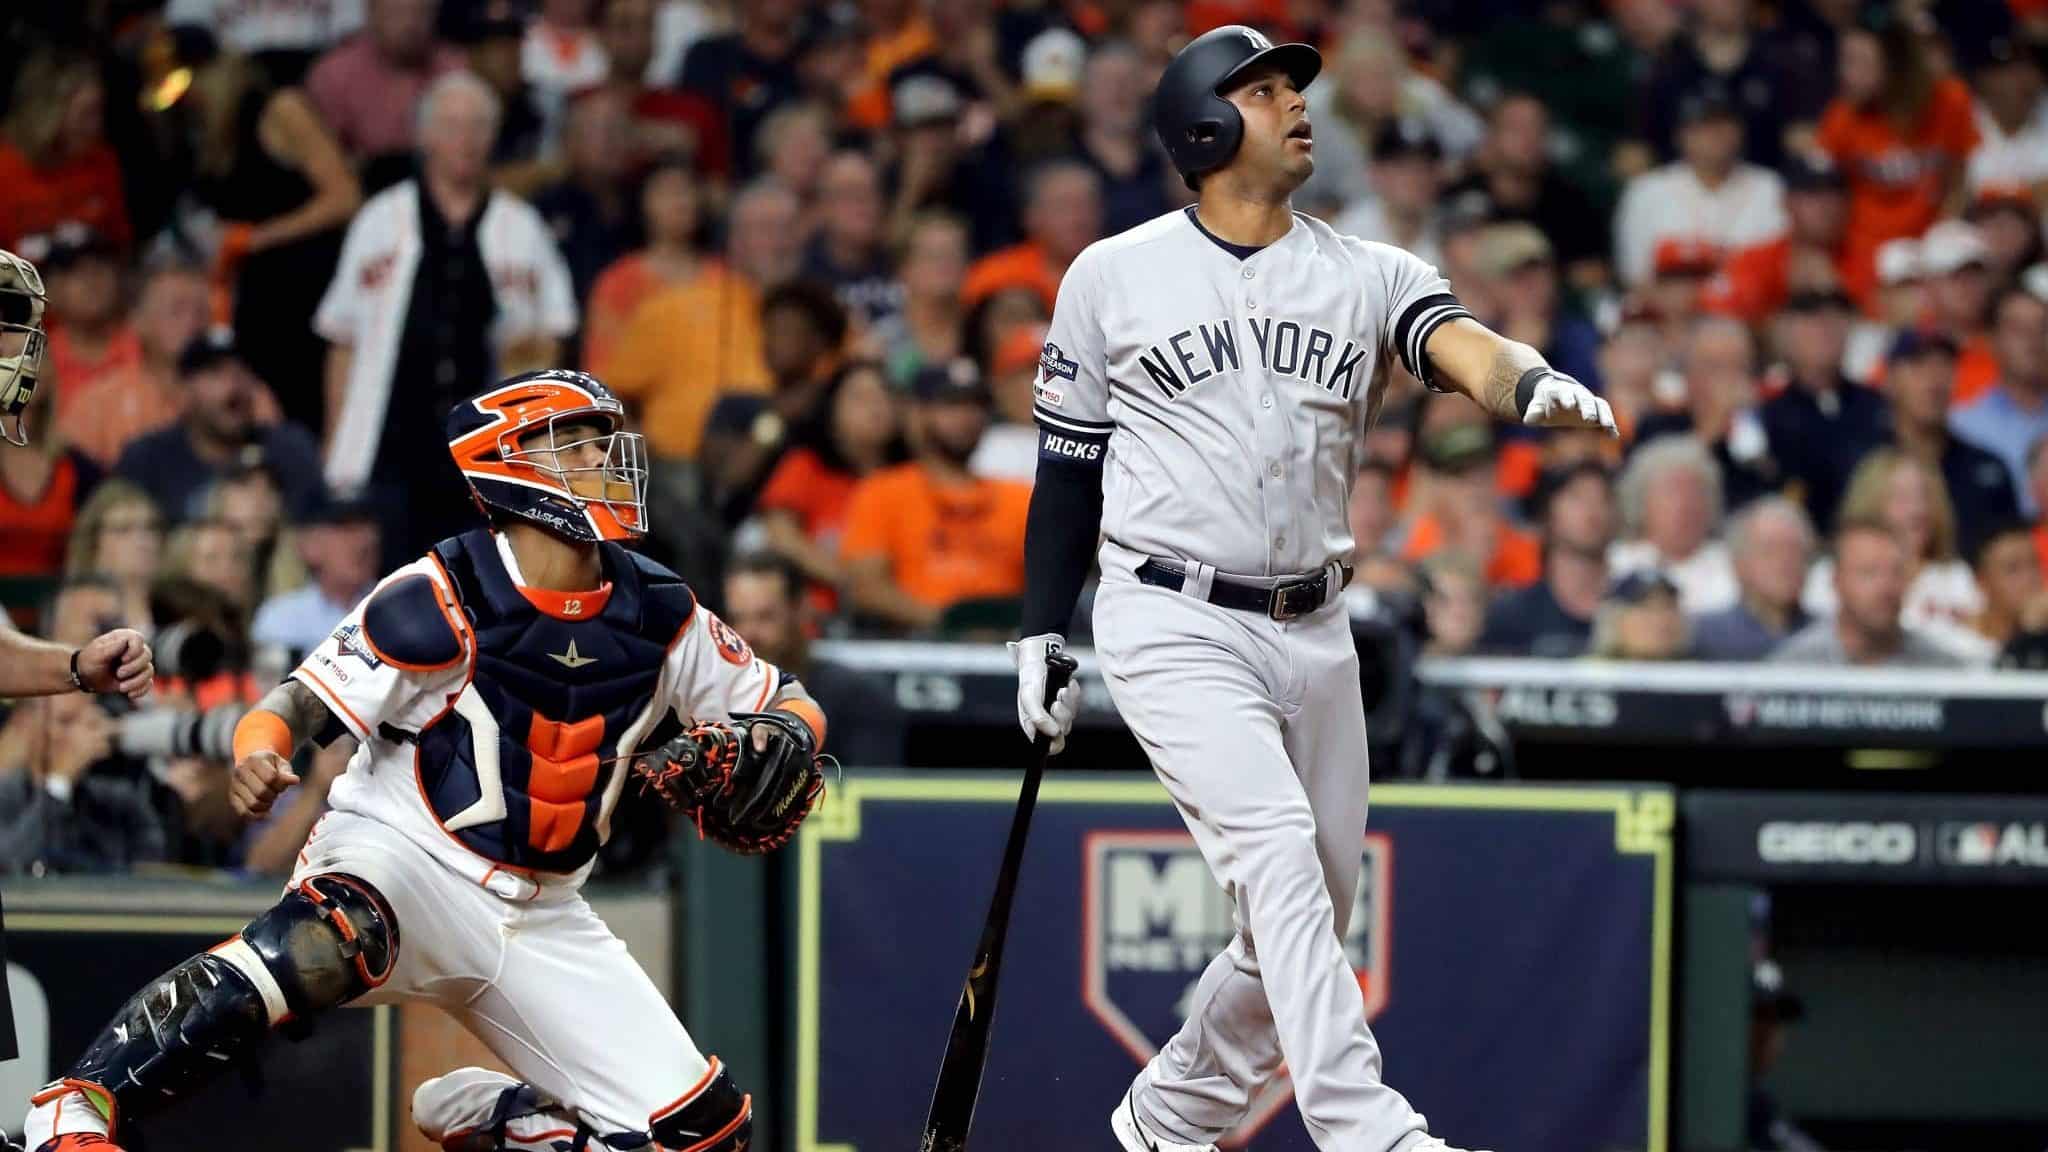 HOUSTON, TEXAS - OCTOBER 19: Aaron Hicks #31 of the New York Yankees flies out against the Houston Astros during the third inning in game six of the American League Championship Series at Minute Maid Park on October 19, 2019 in Houston, Texas.